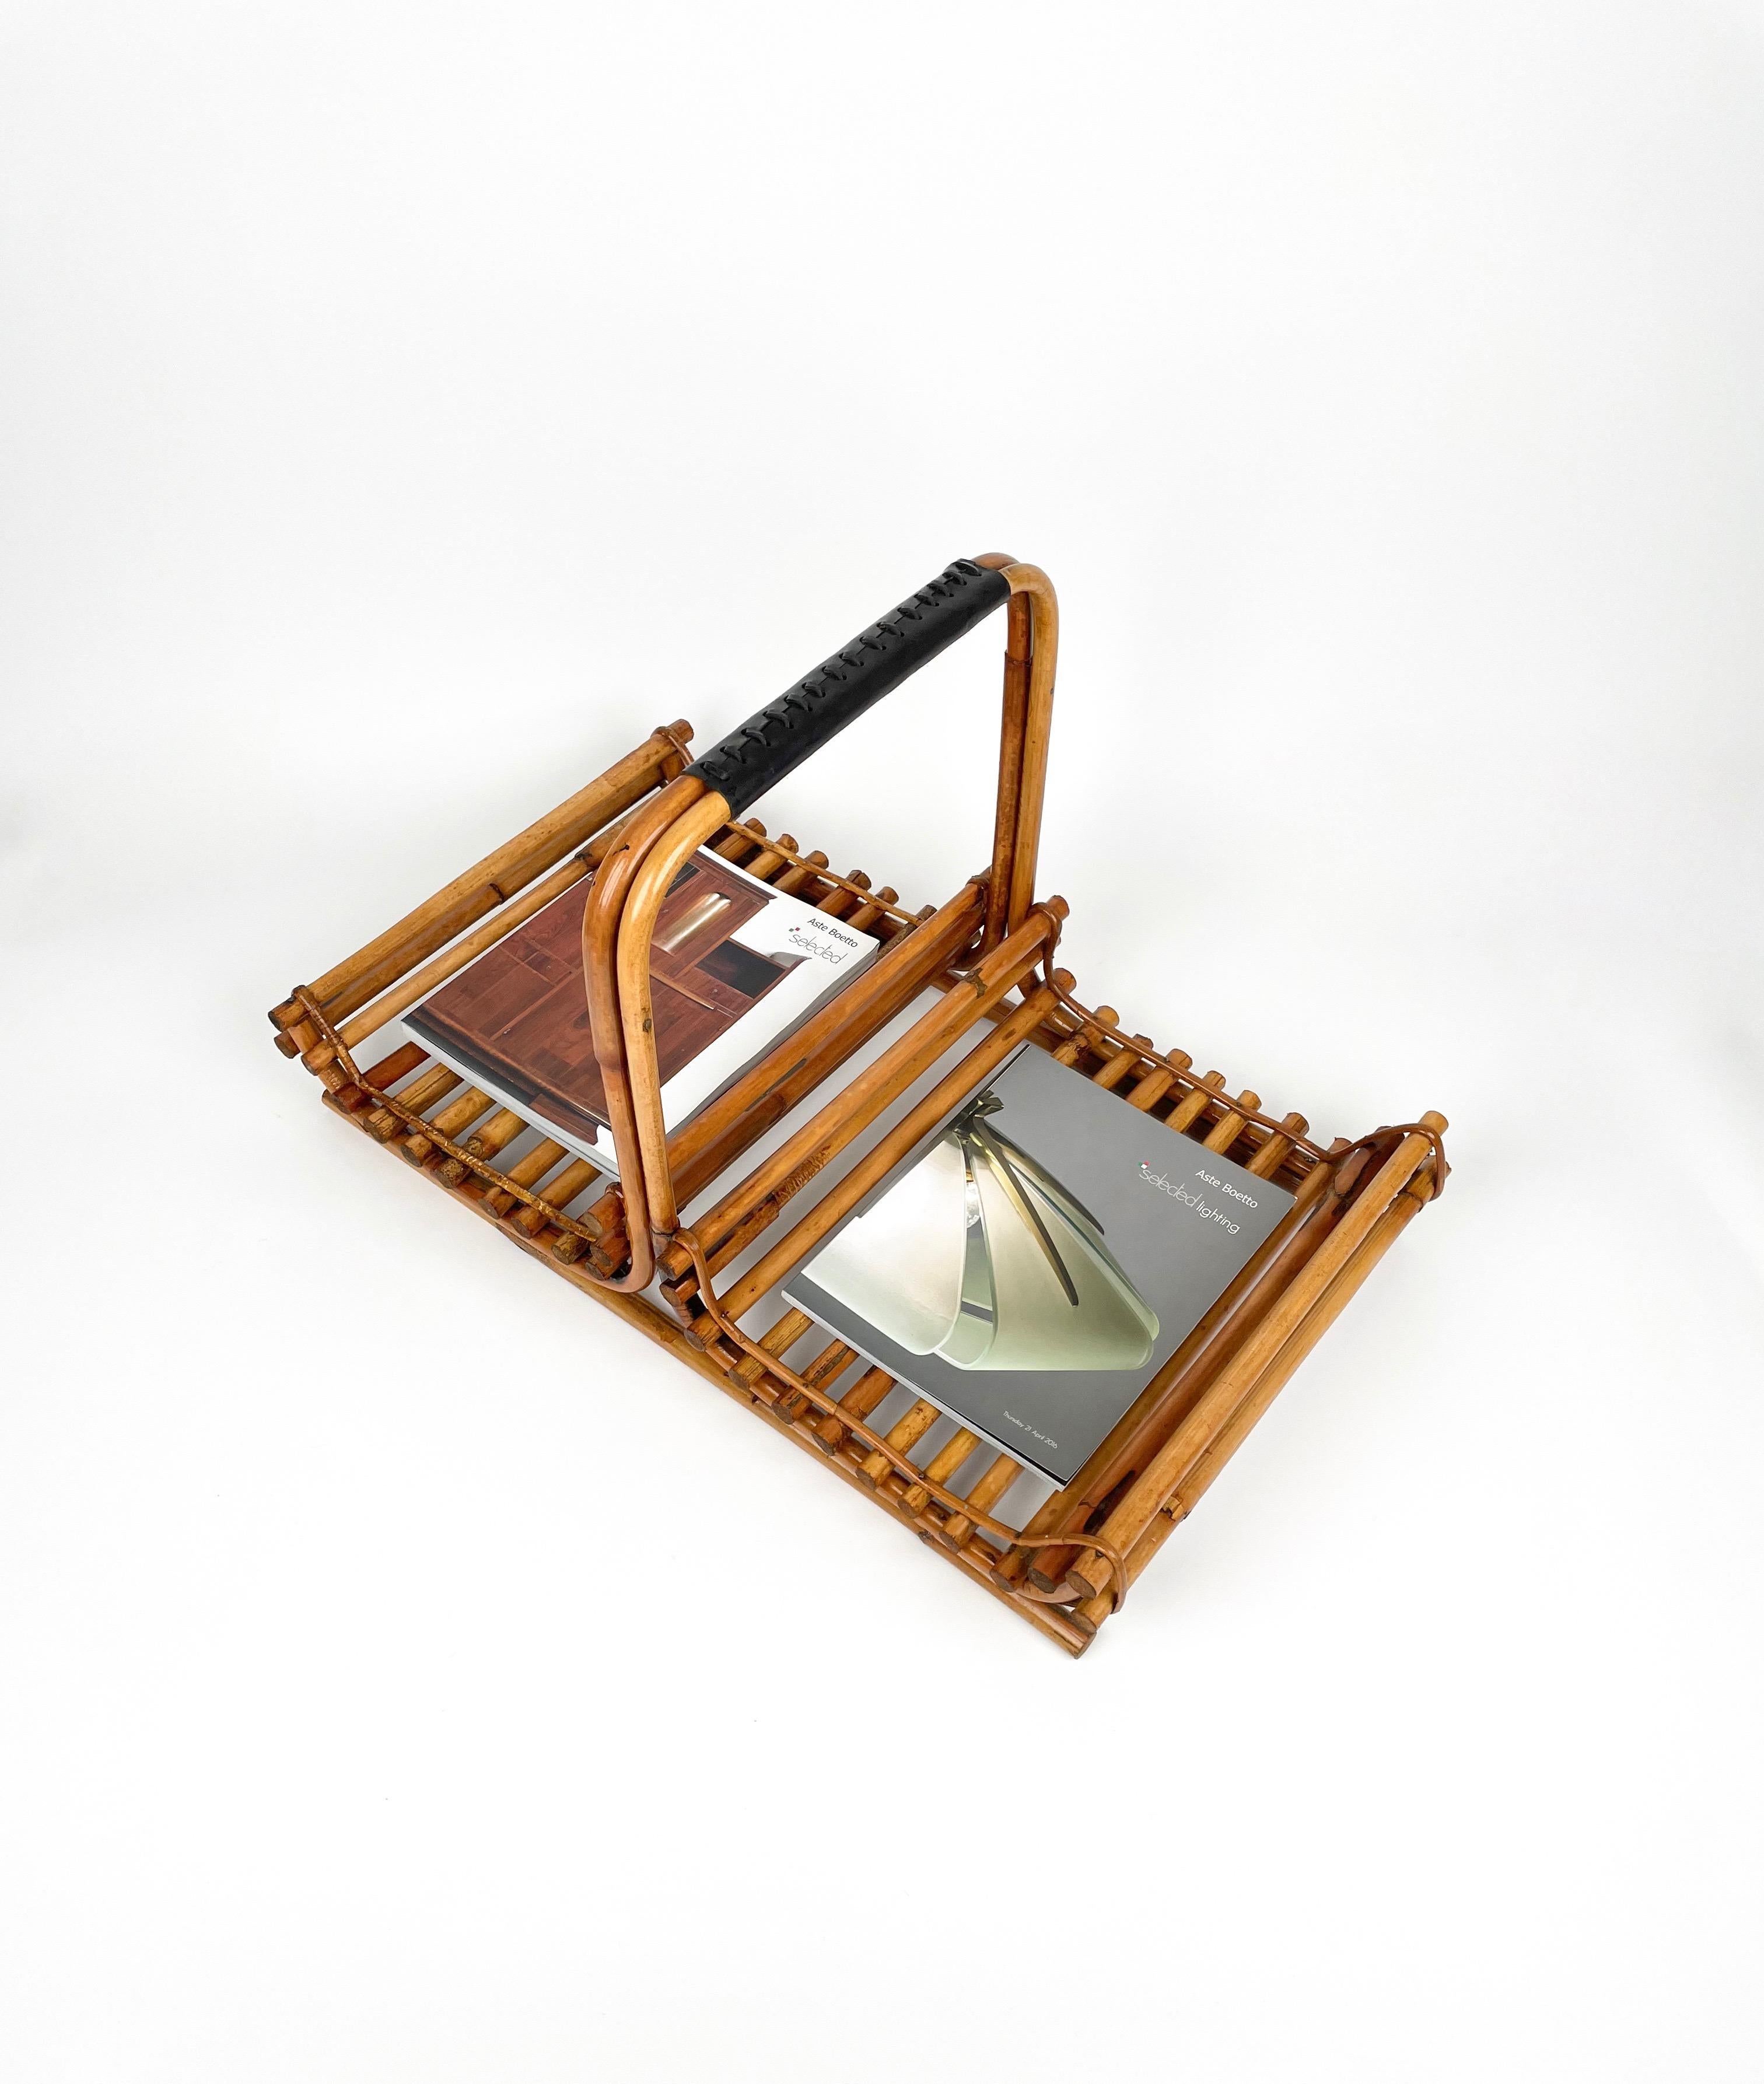 Midcentury Bamboo and Leather Magazine Rack, Italy, 1960s For Sale 4